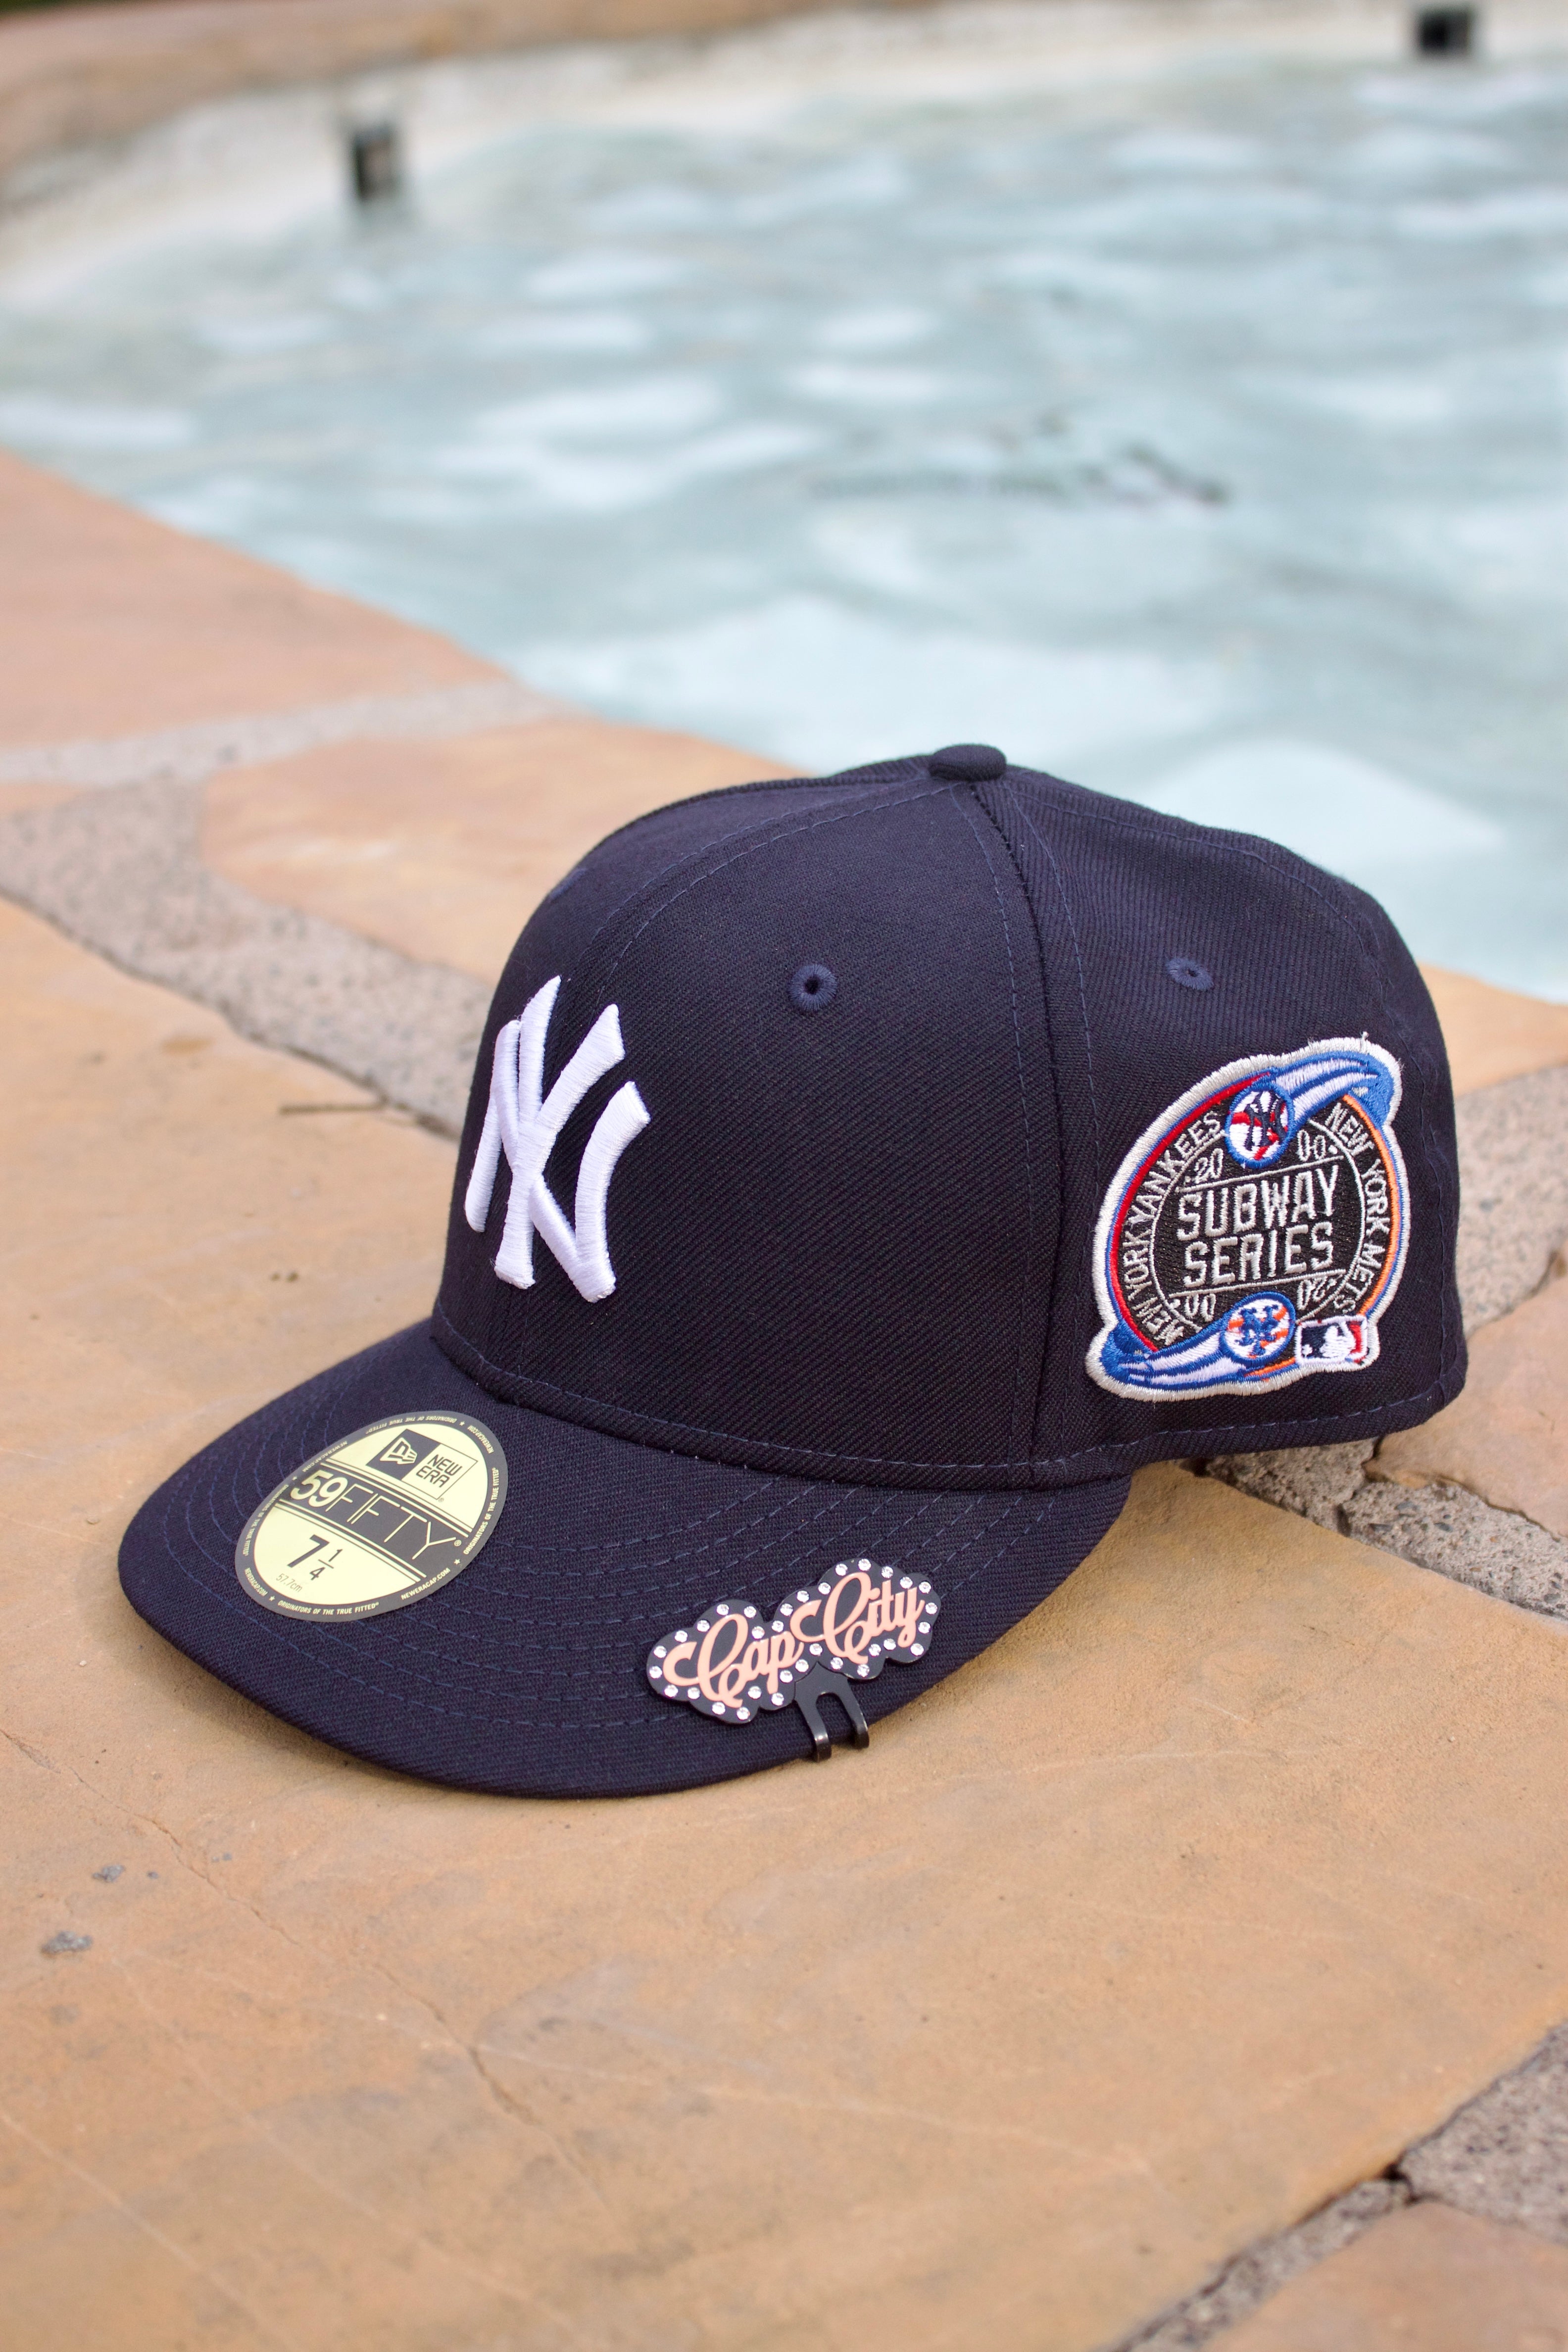 NEW ERA 59FIFTY NAVY NEW YORK YANKEES W/ 2000 SUBWAY SERIES PATCH